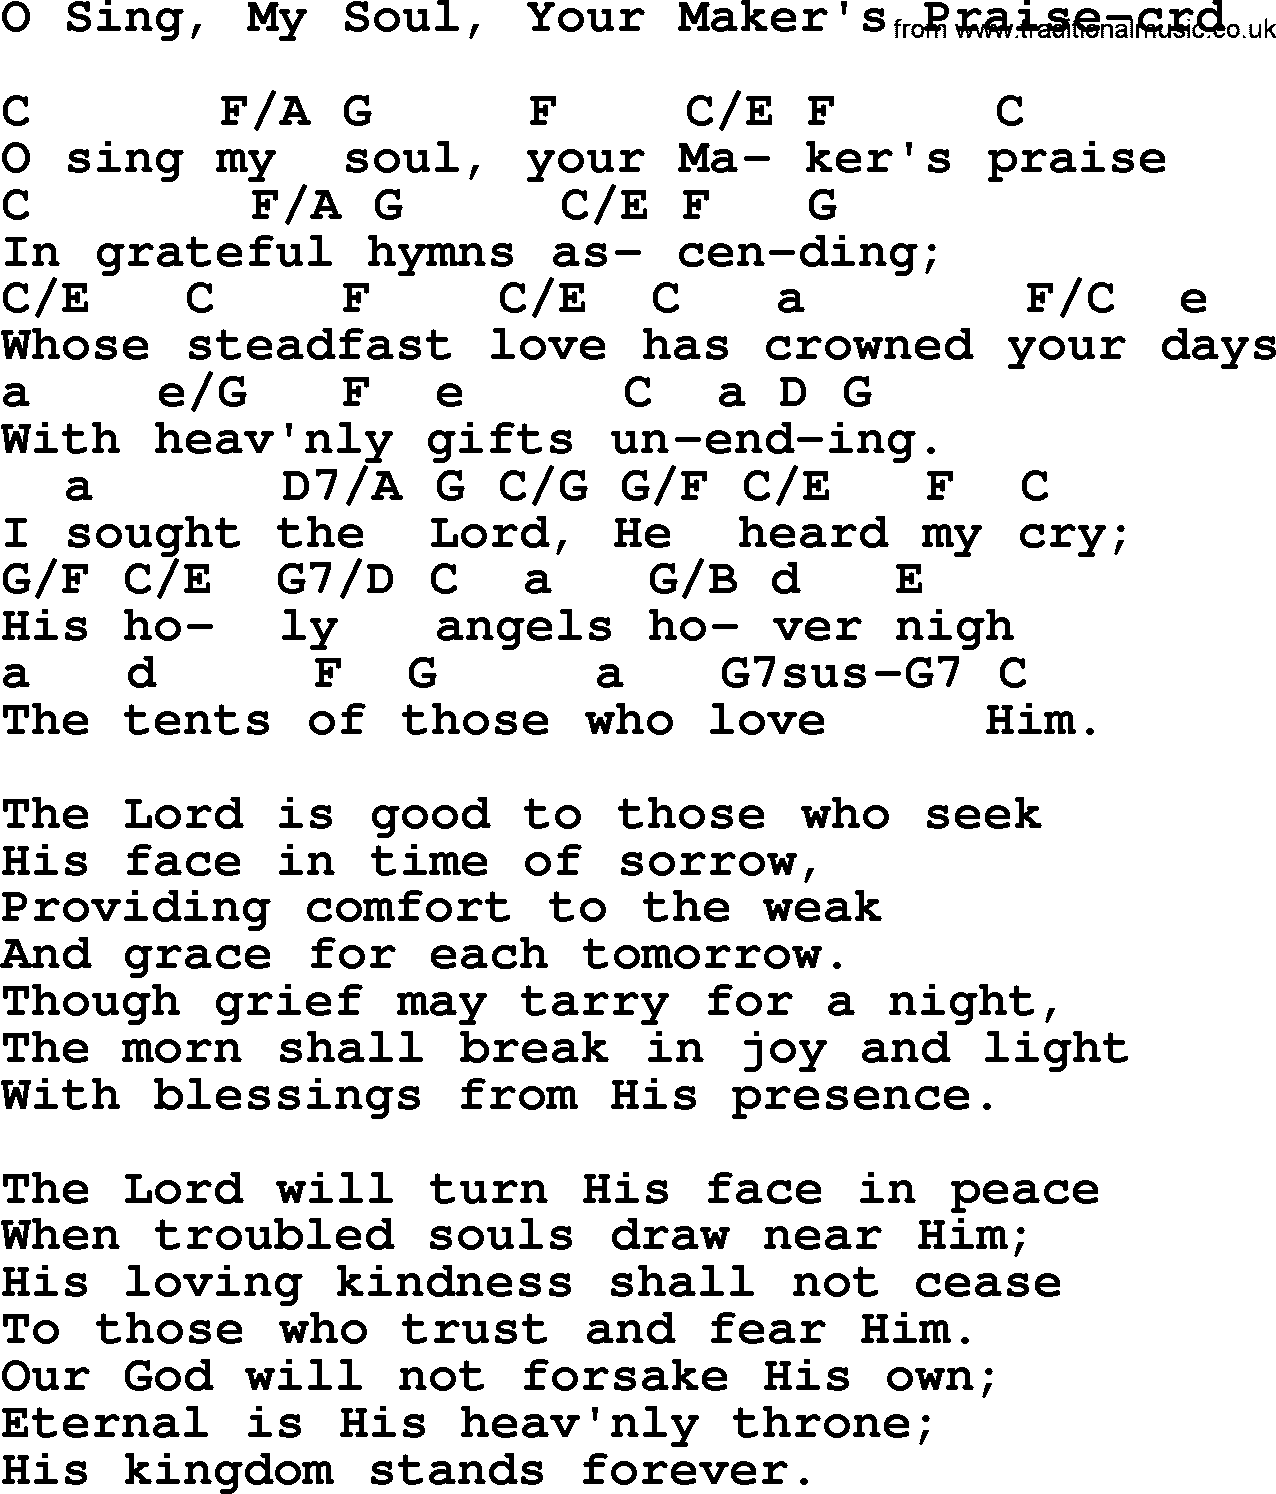 Top 500 Hymn: O Sing, My Soul, Your Maker's Praise, lyrics and chords